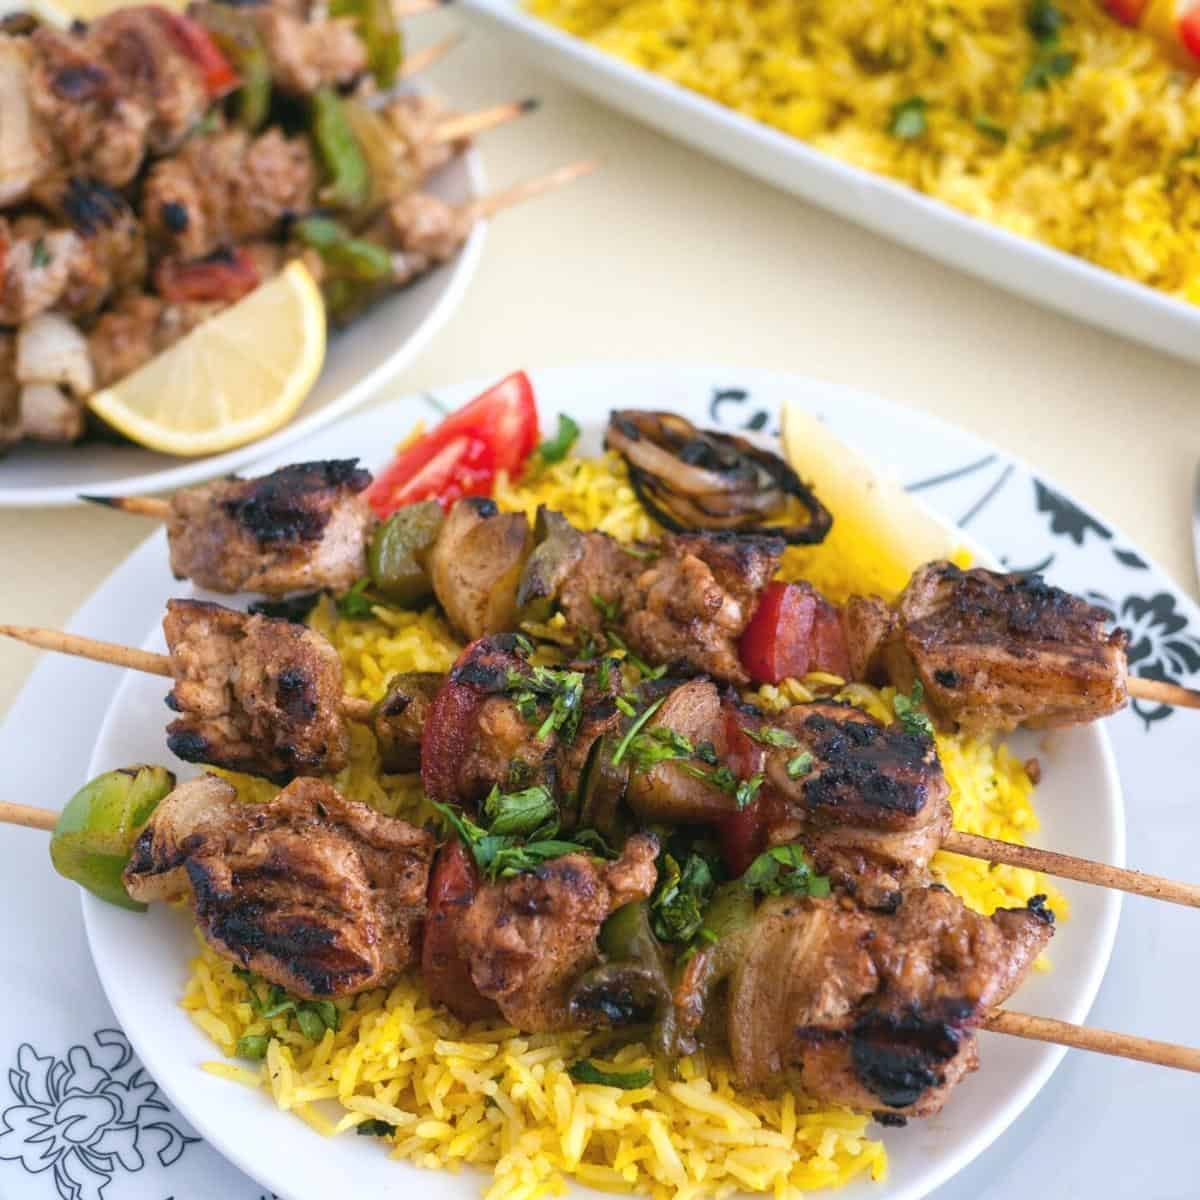 A plate with yellow rice and chicken on skewers.